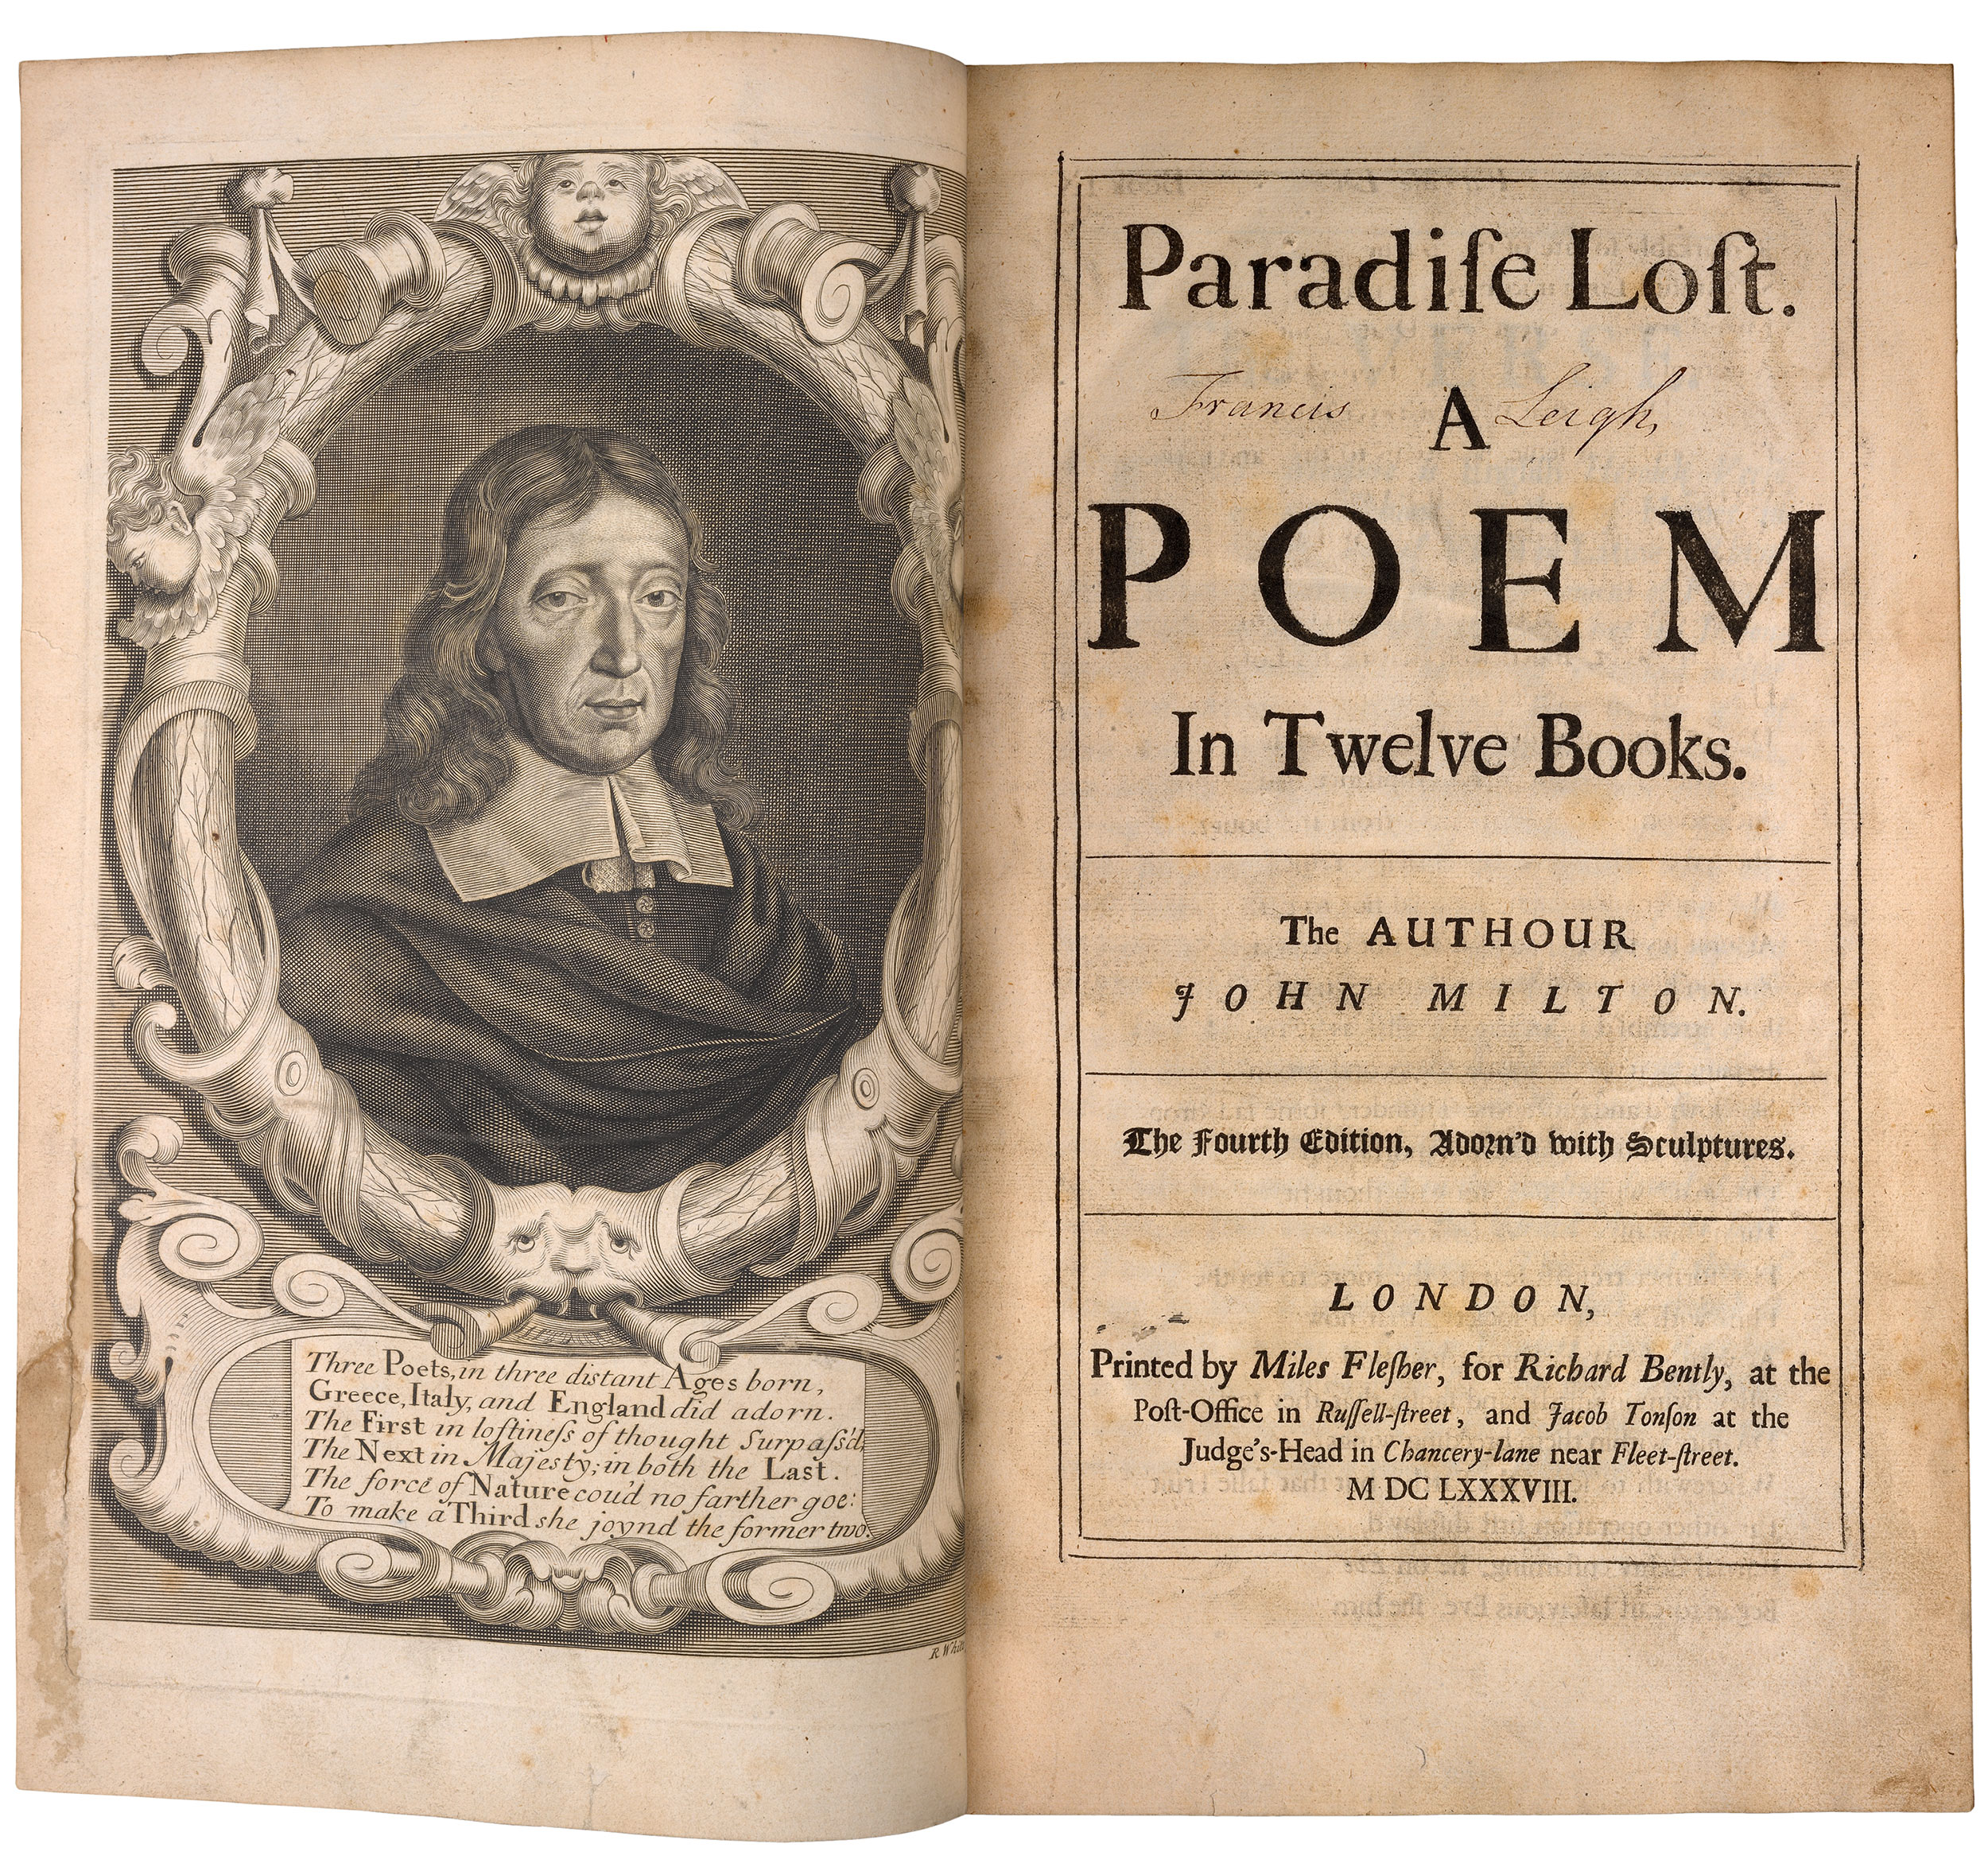 paradise lost book